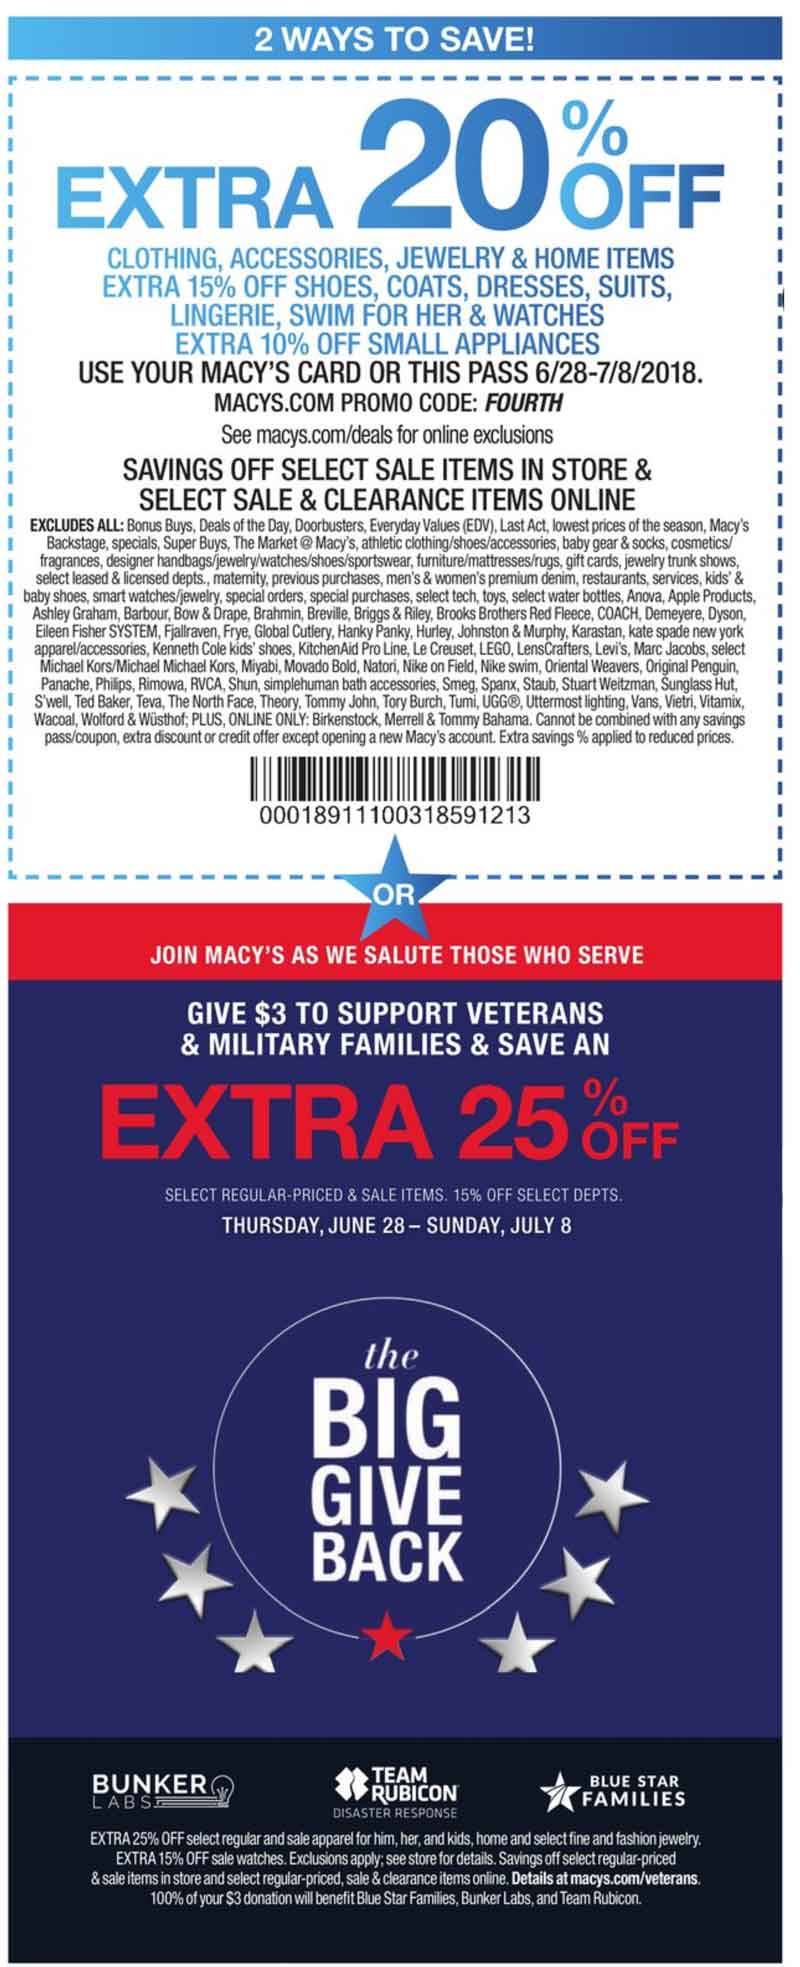 Macy's Coupons In Store Printable - FreePrintable.me